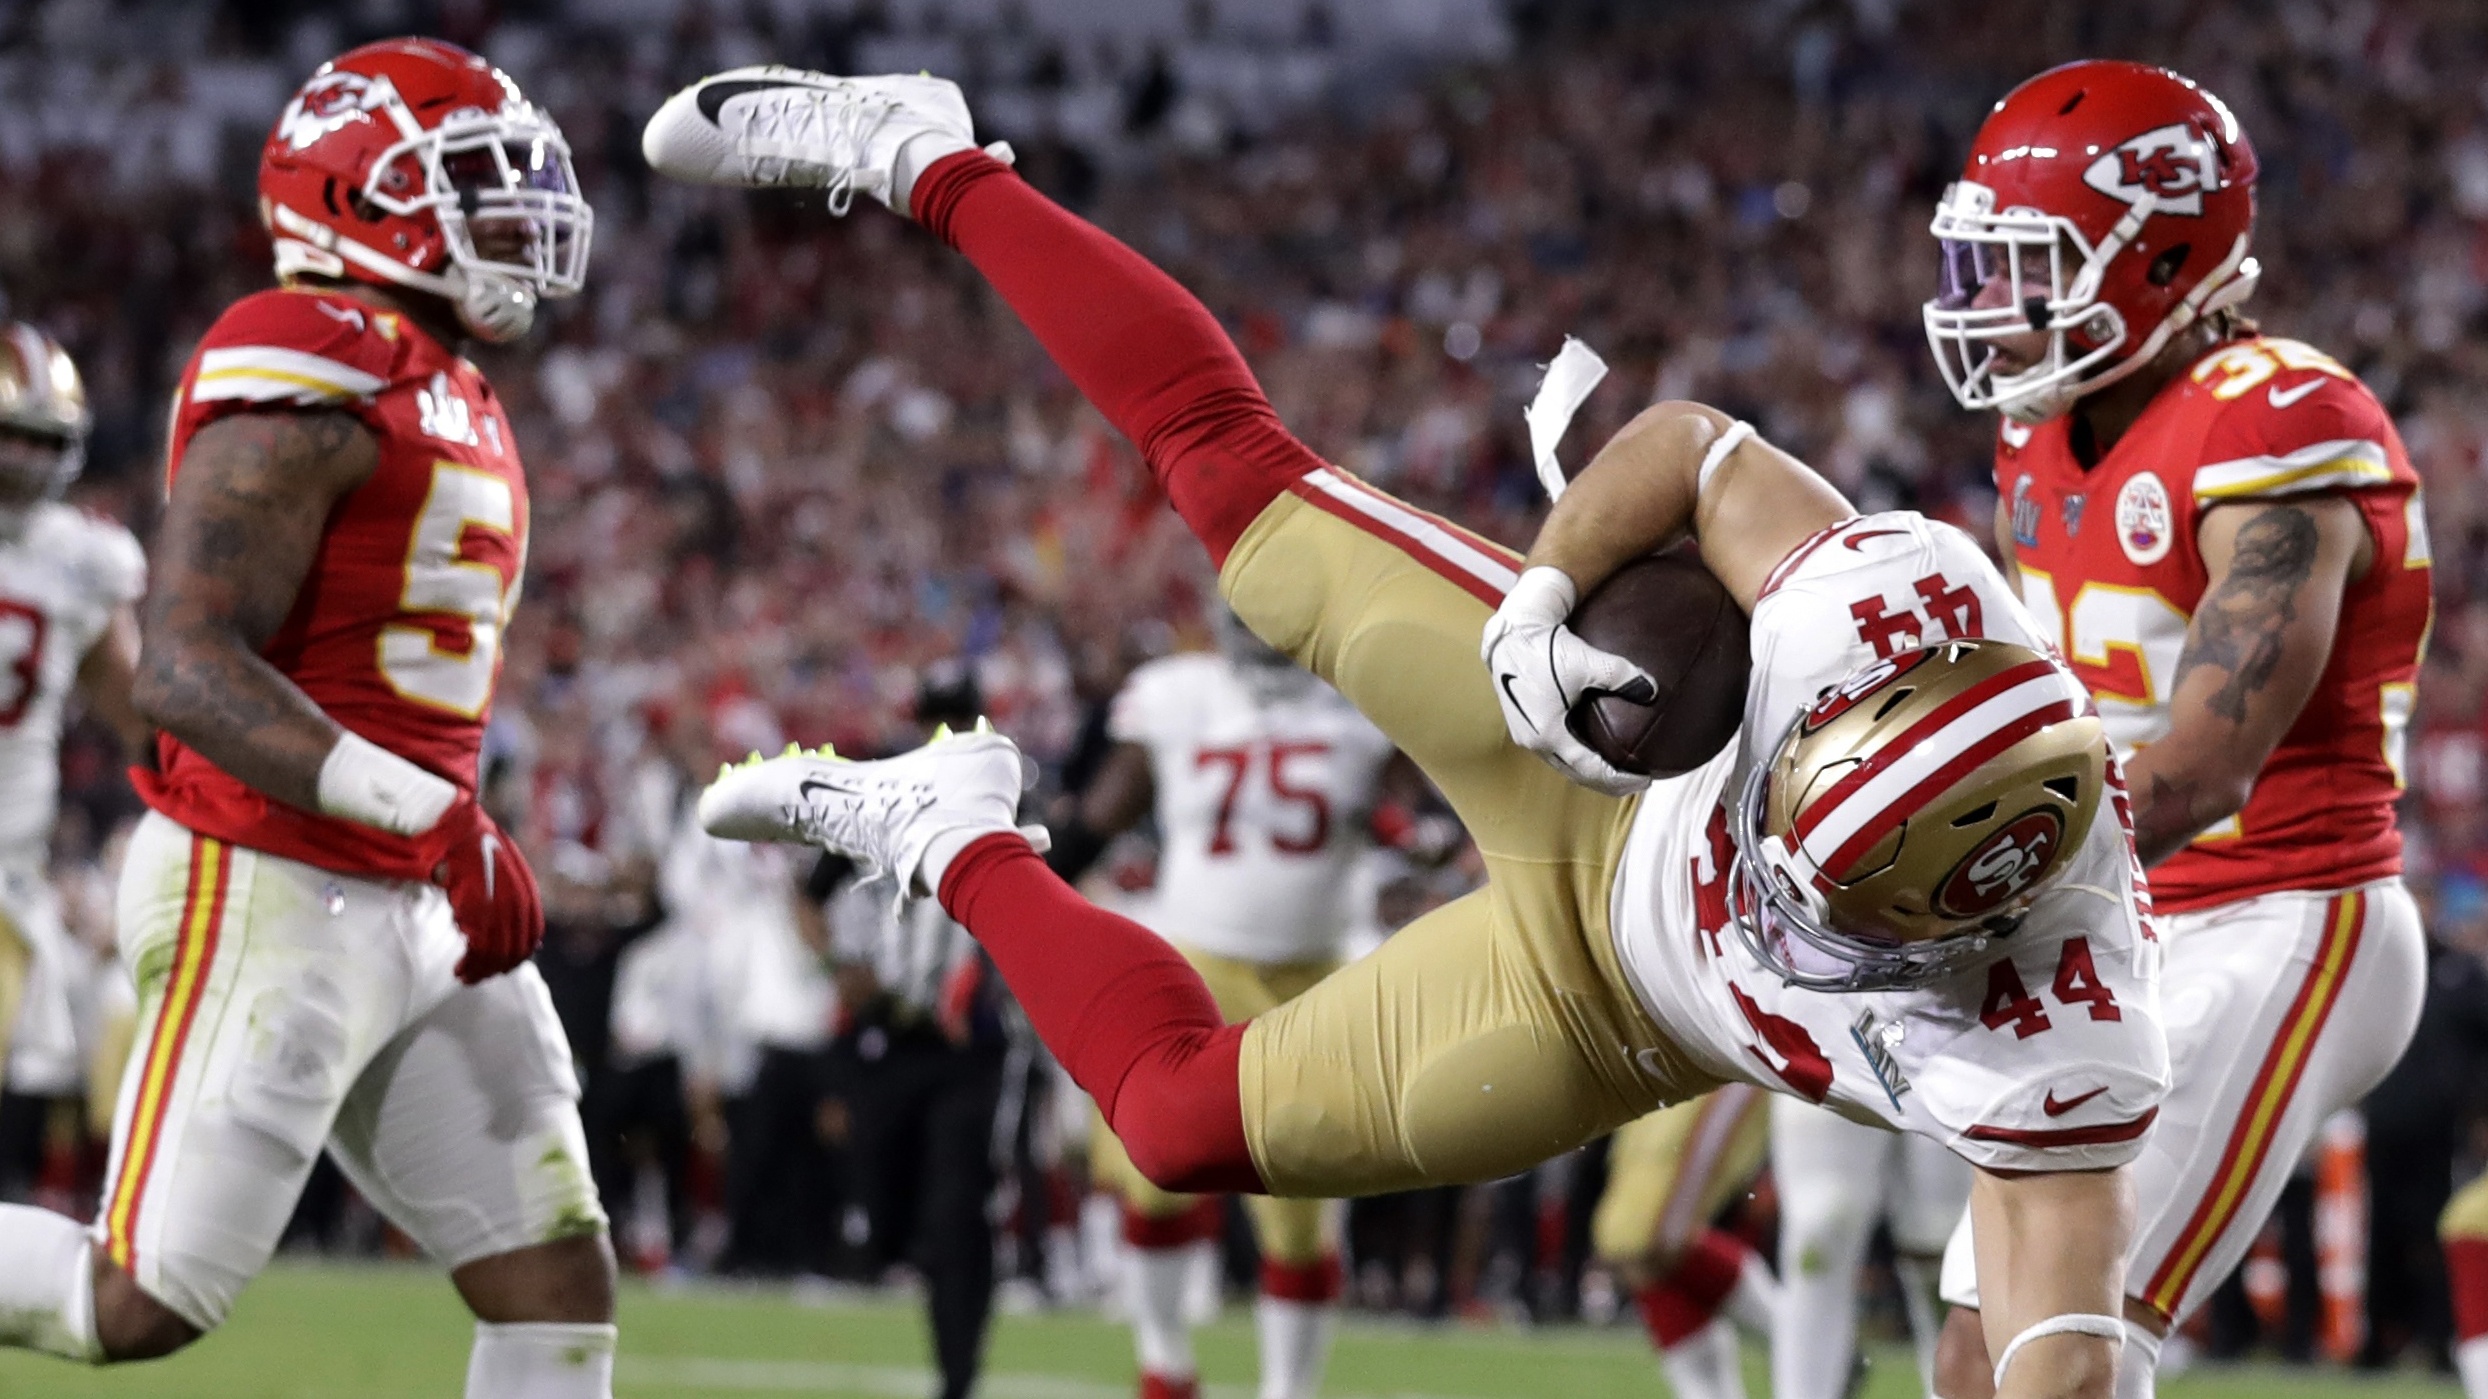 Super Bowl 2020 live updates: Score, Chiefs vs. 49ers play-by-play